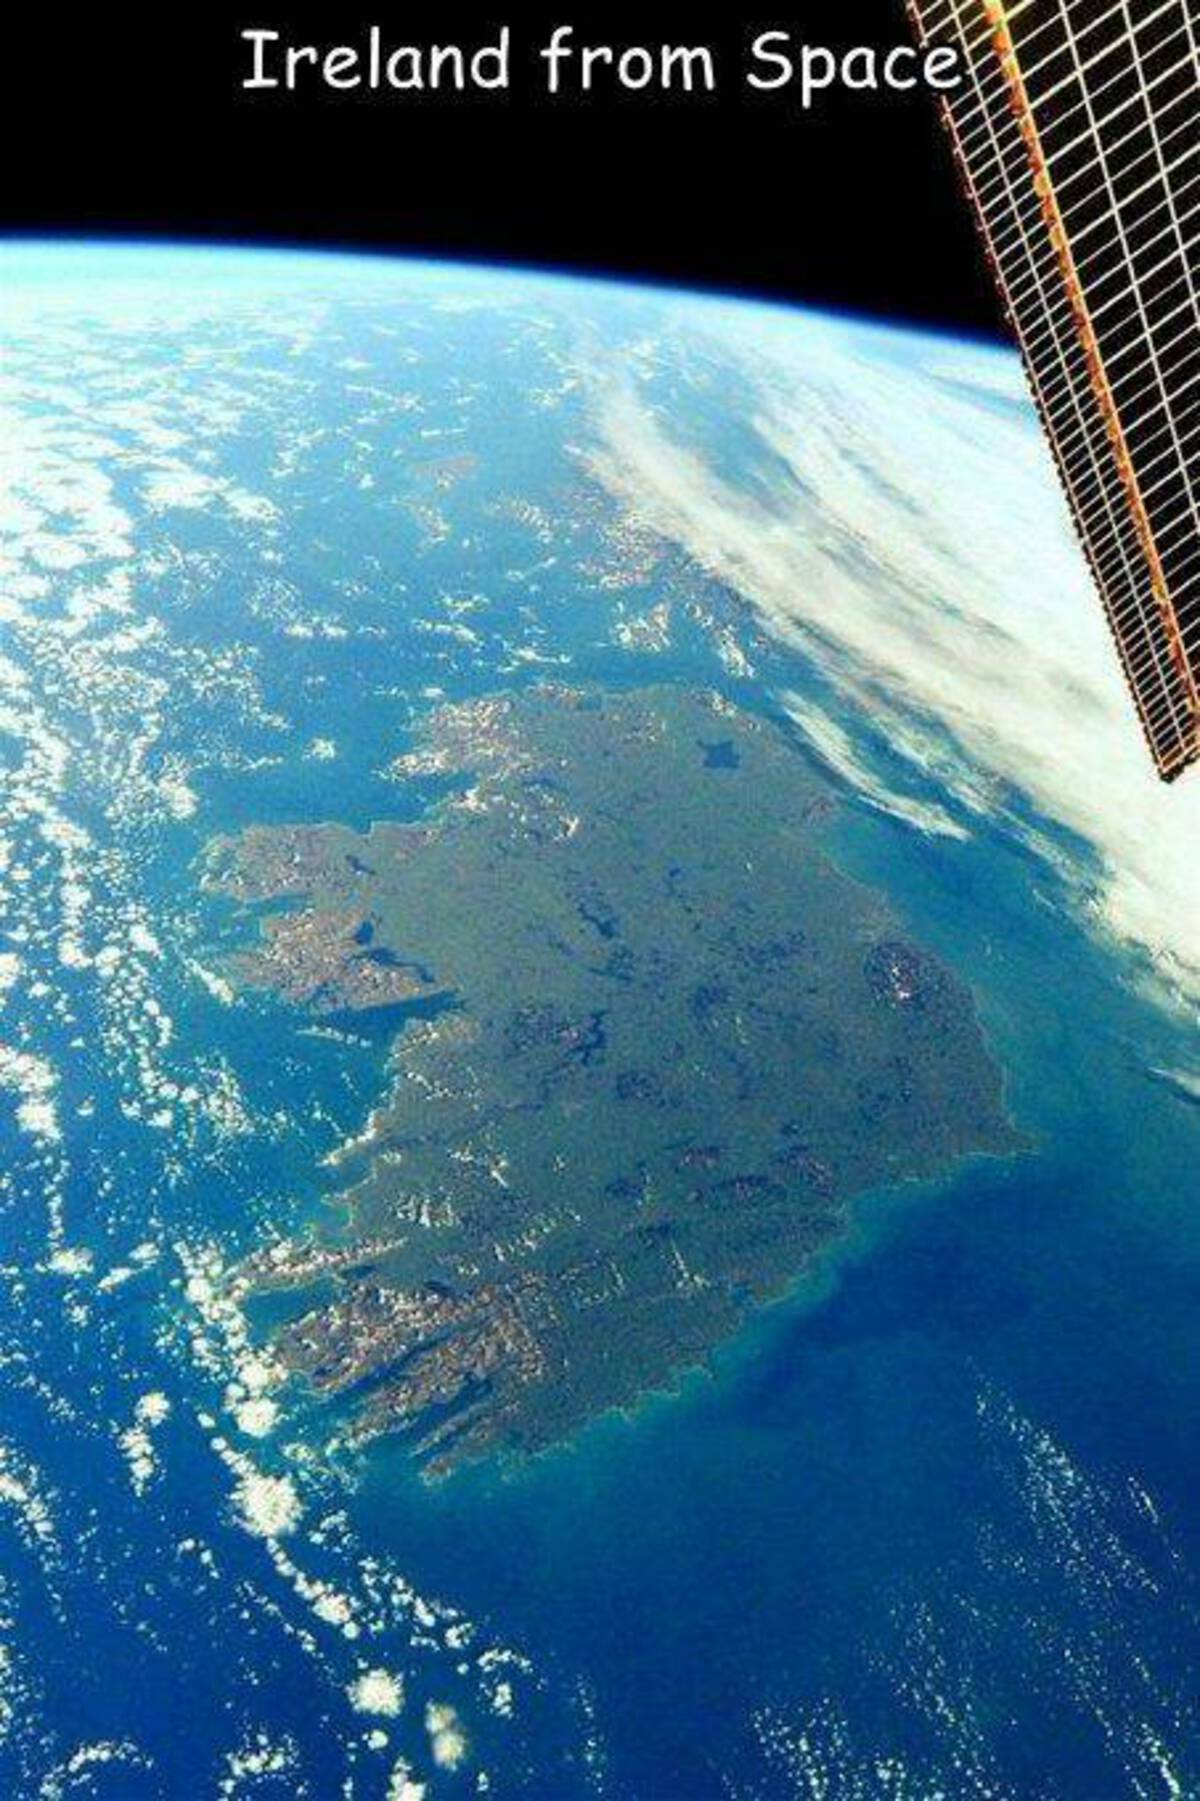 ireland from space - Ireland from Space